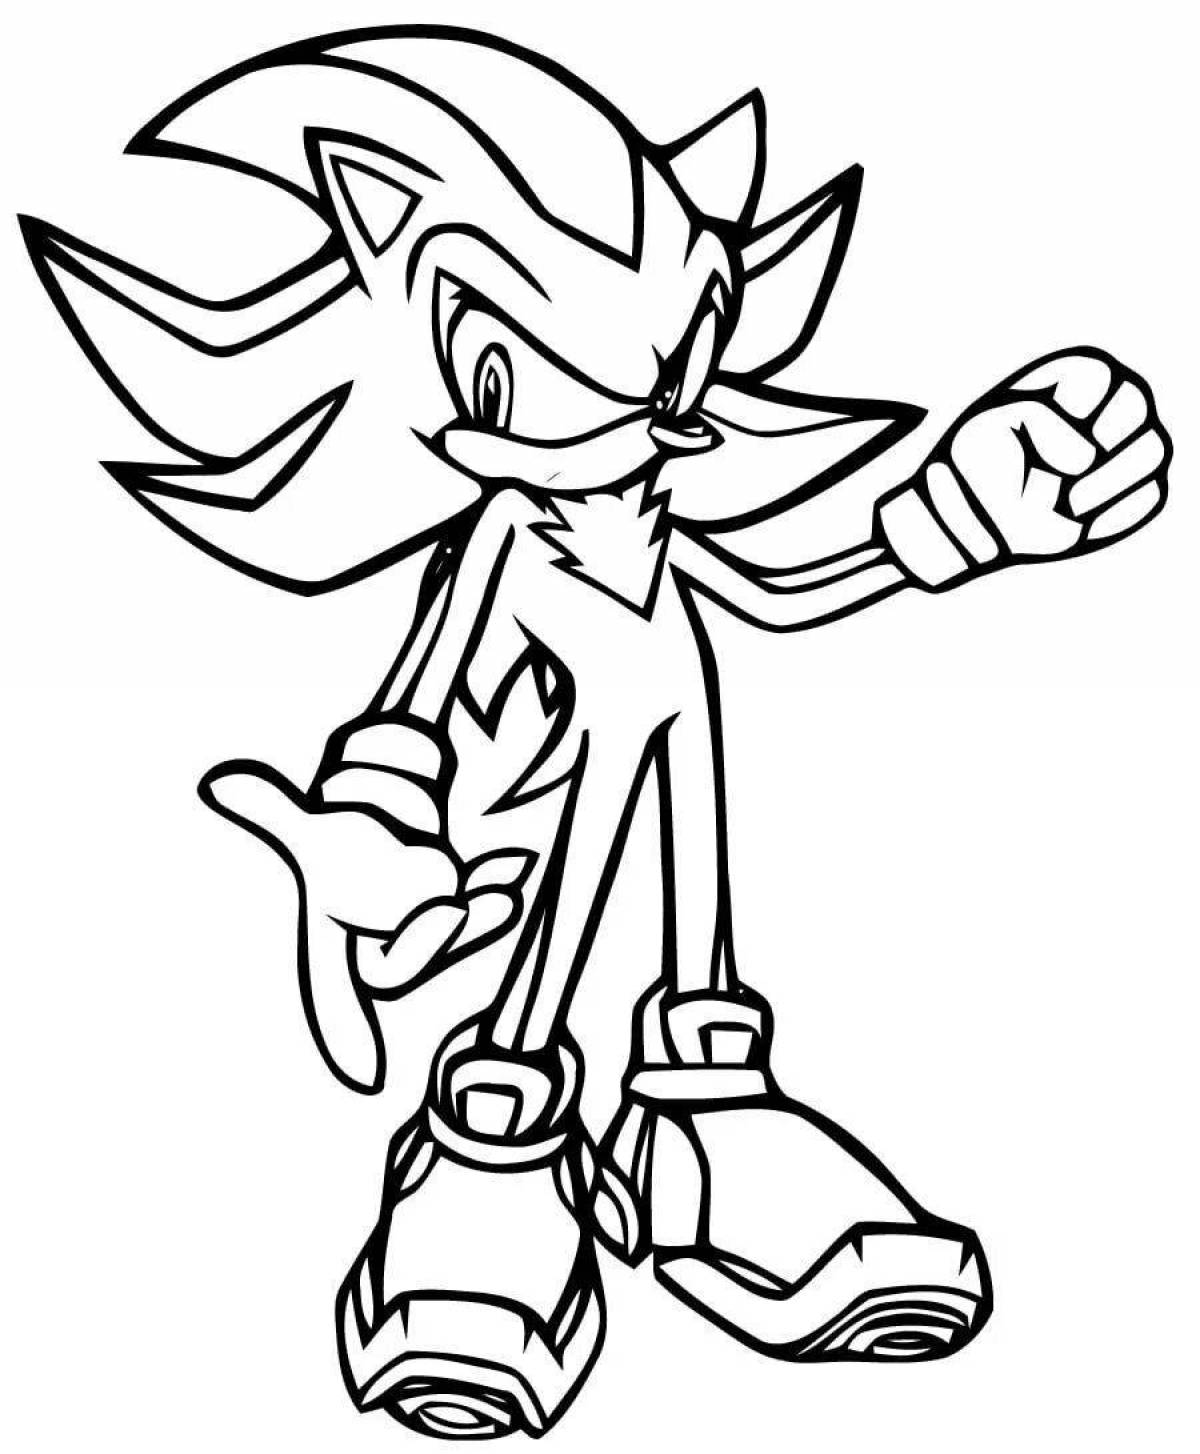 Xs sonic incredible coloring page